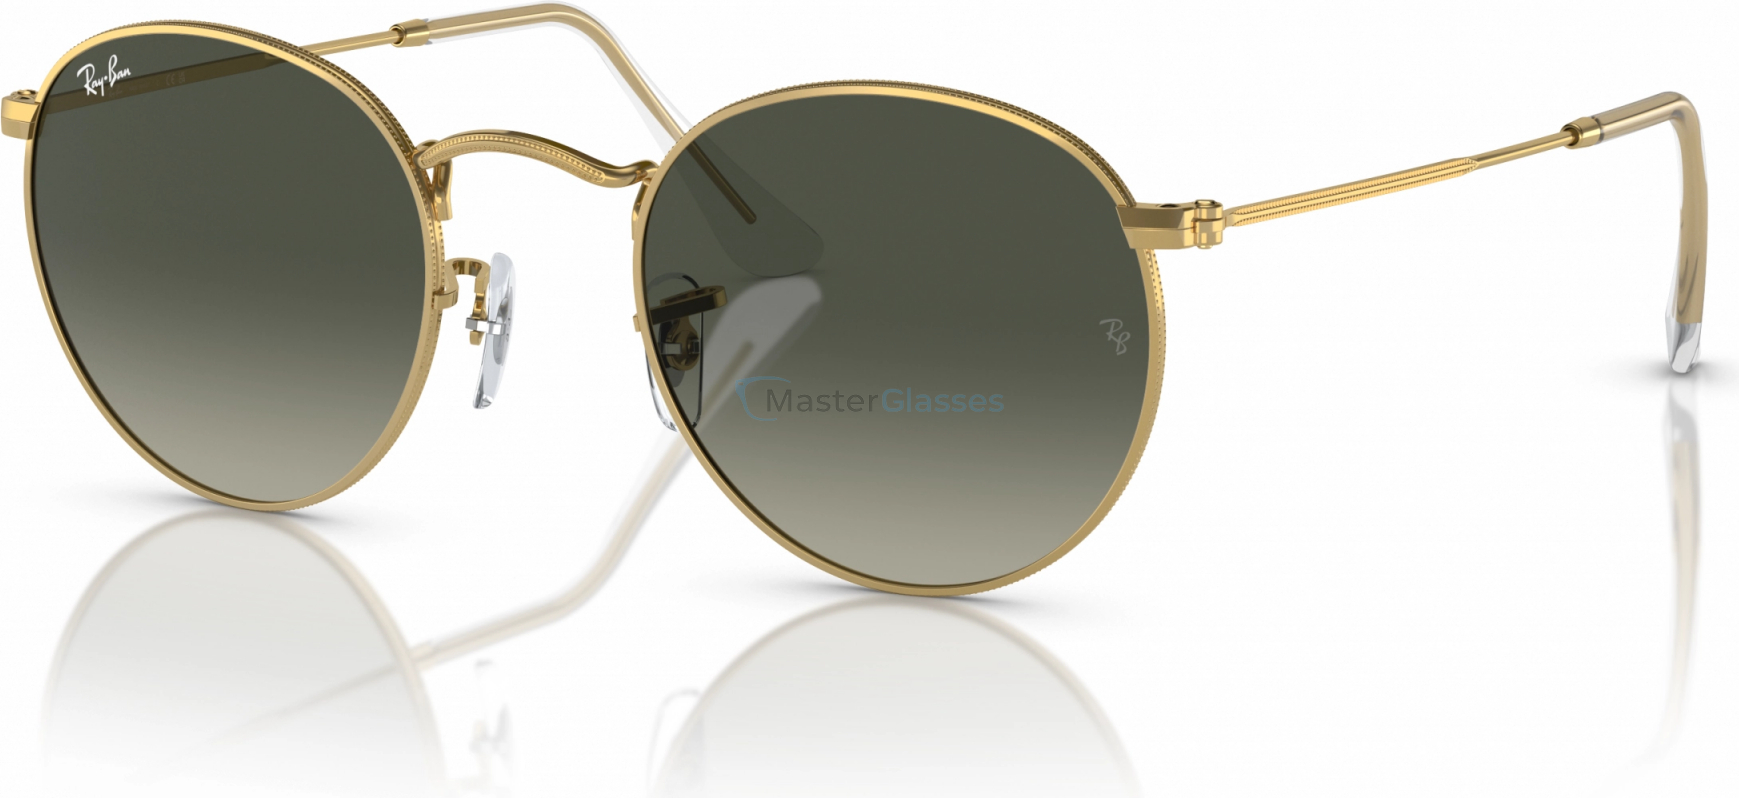   Ray-Ban ROUND METAL RB3447 001/71 Gold